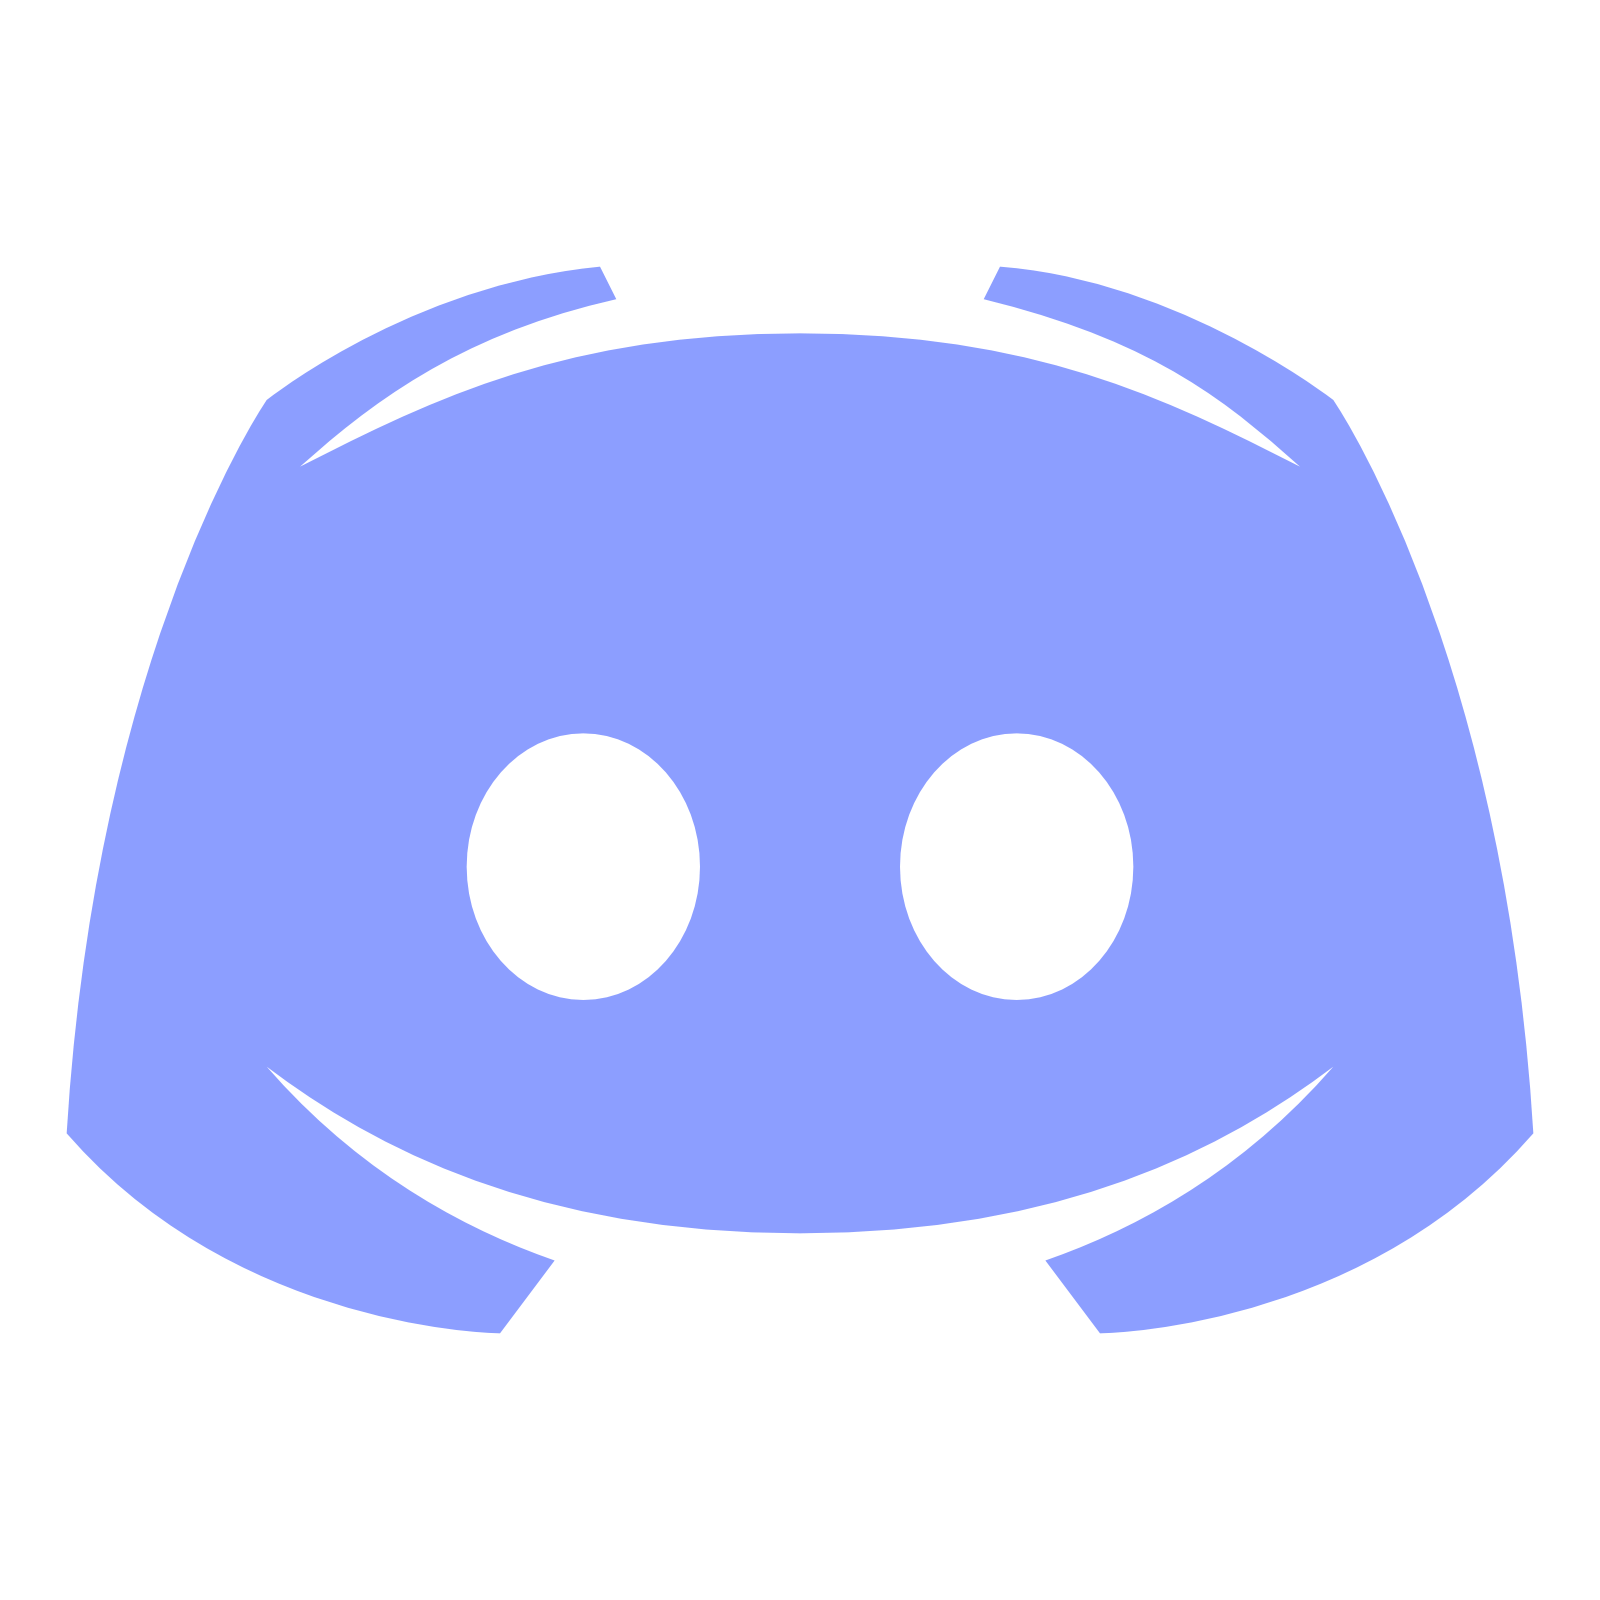 Discord_icon.png